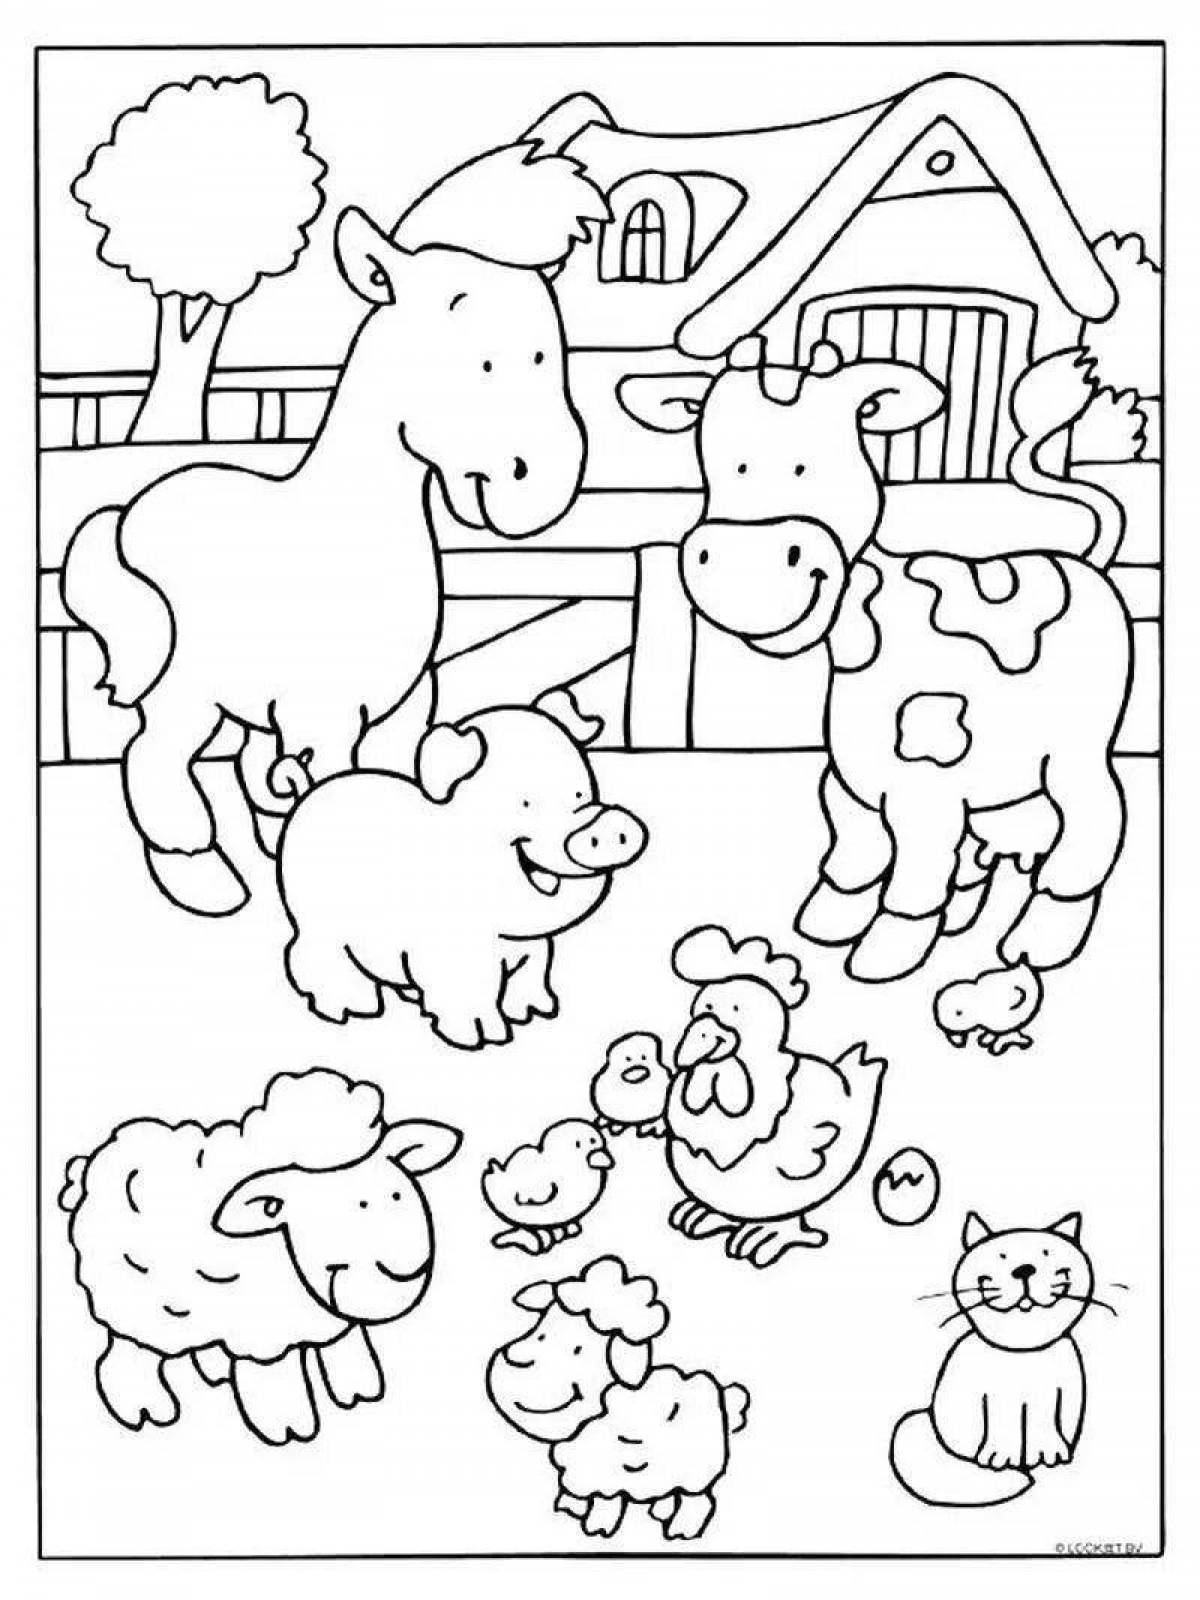 Witty animal coloring pages